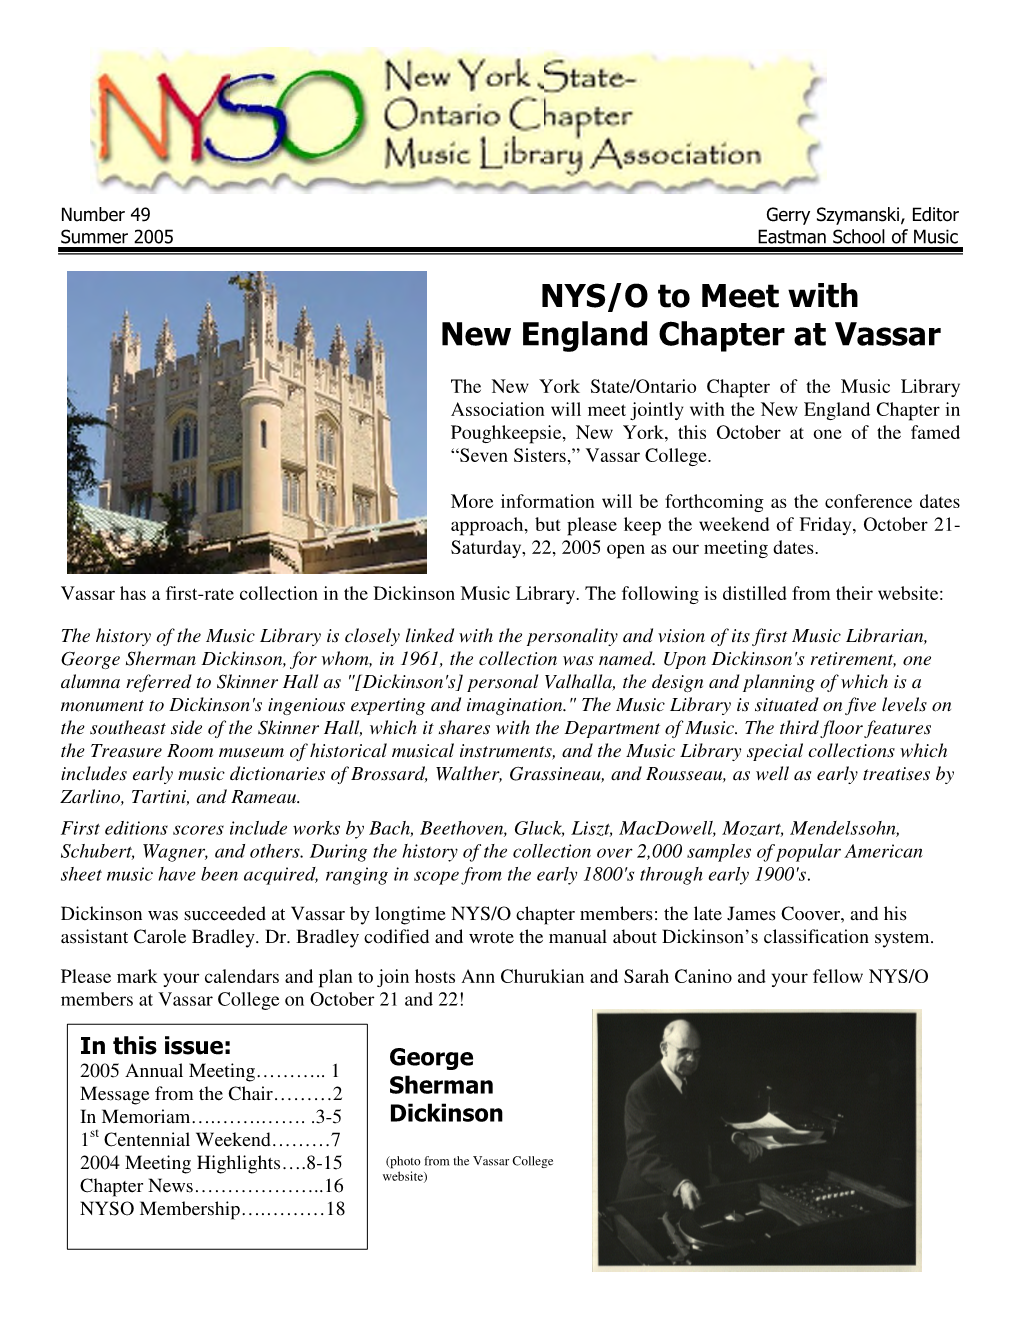 NYS/O to Meet with New England Chapter at Vassar